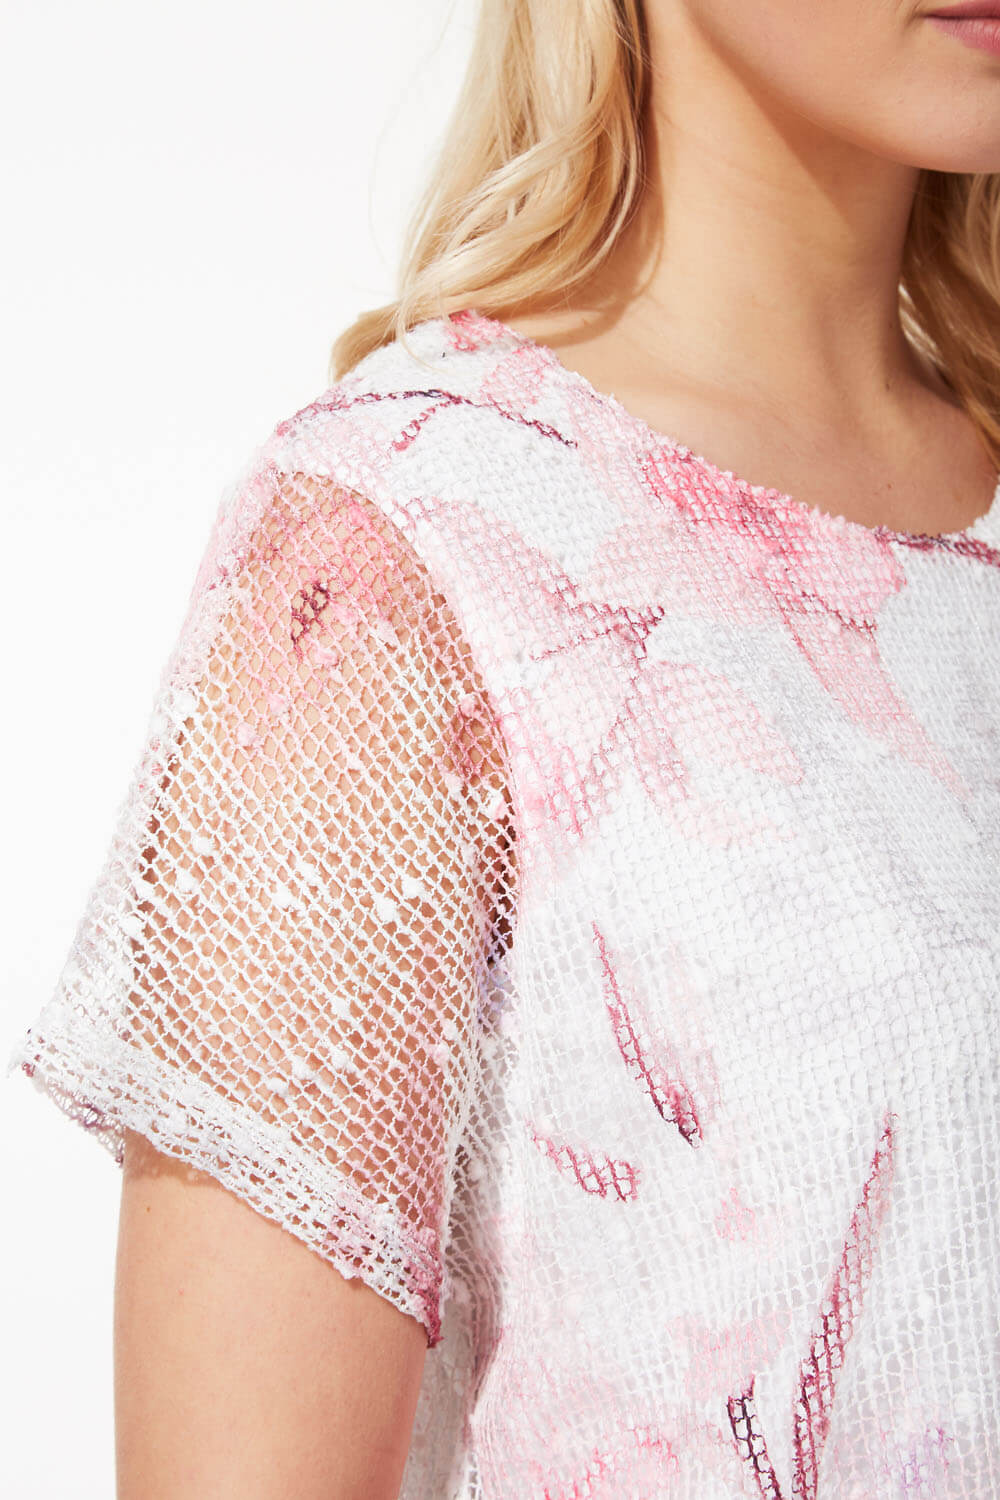 PINK Mesh Overlay Floral Top, Image 4 of 5